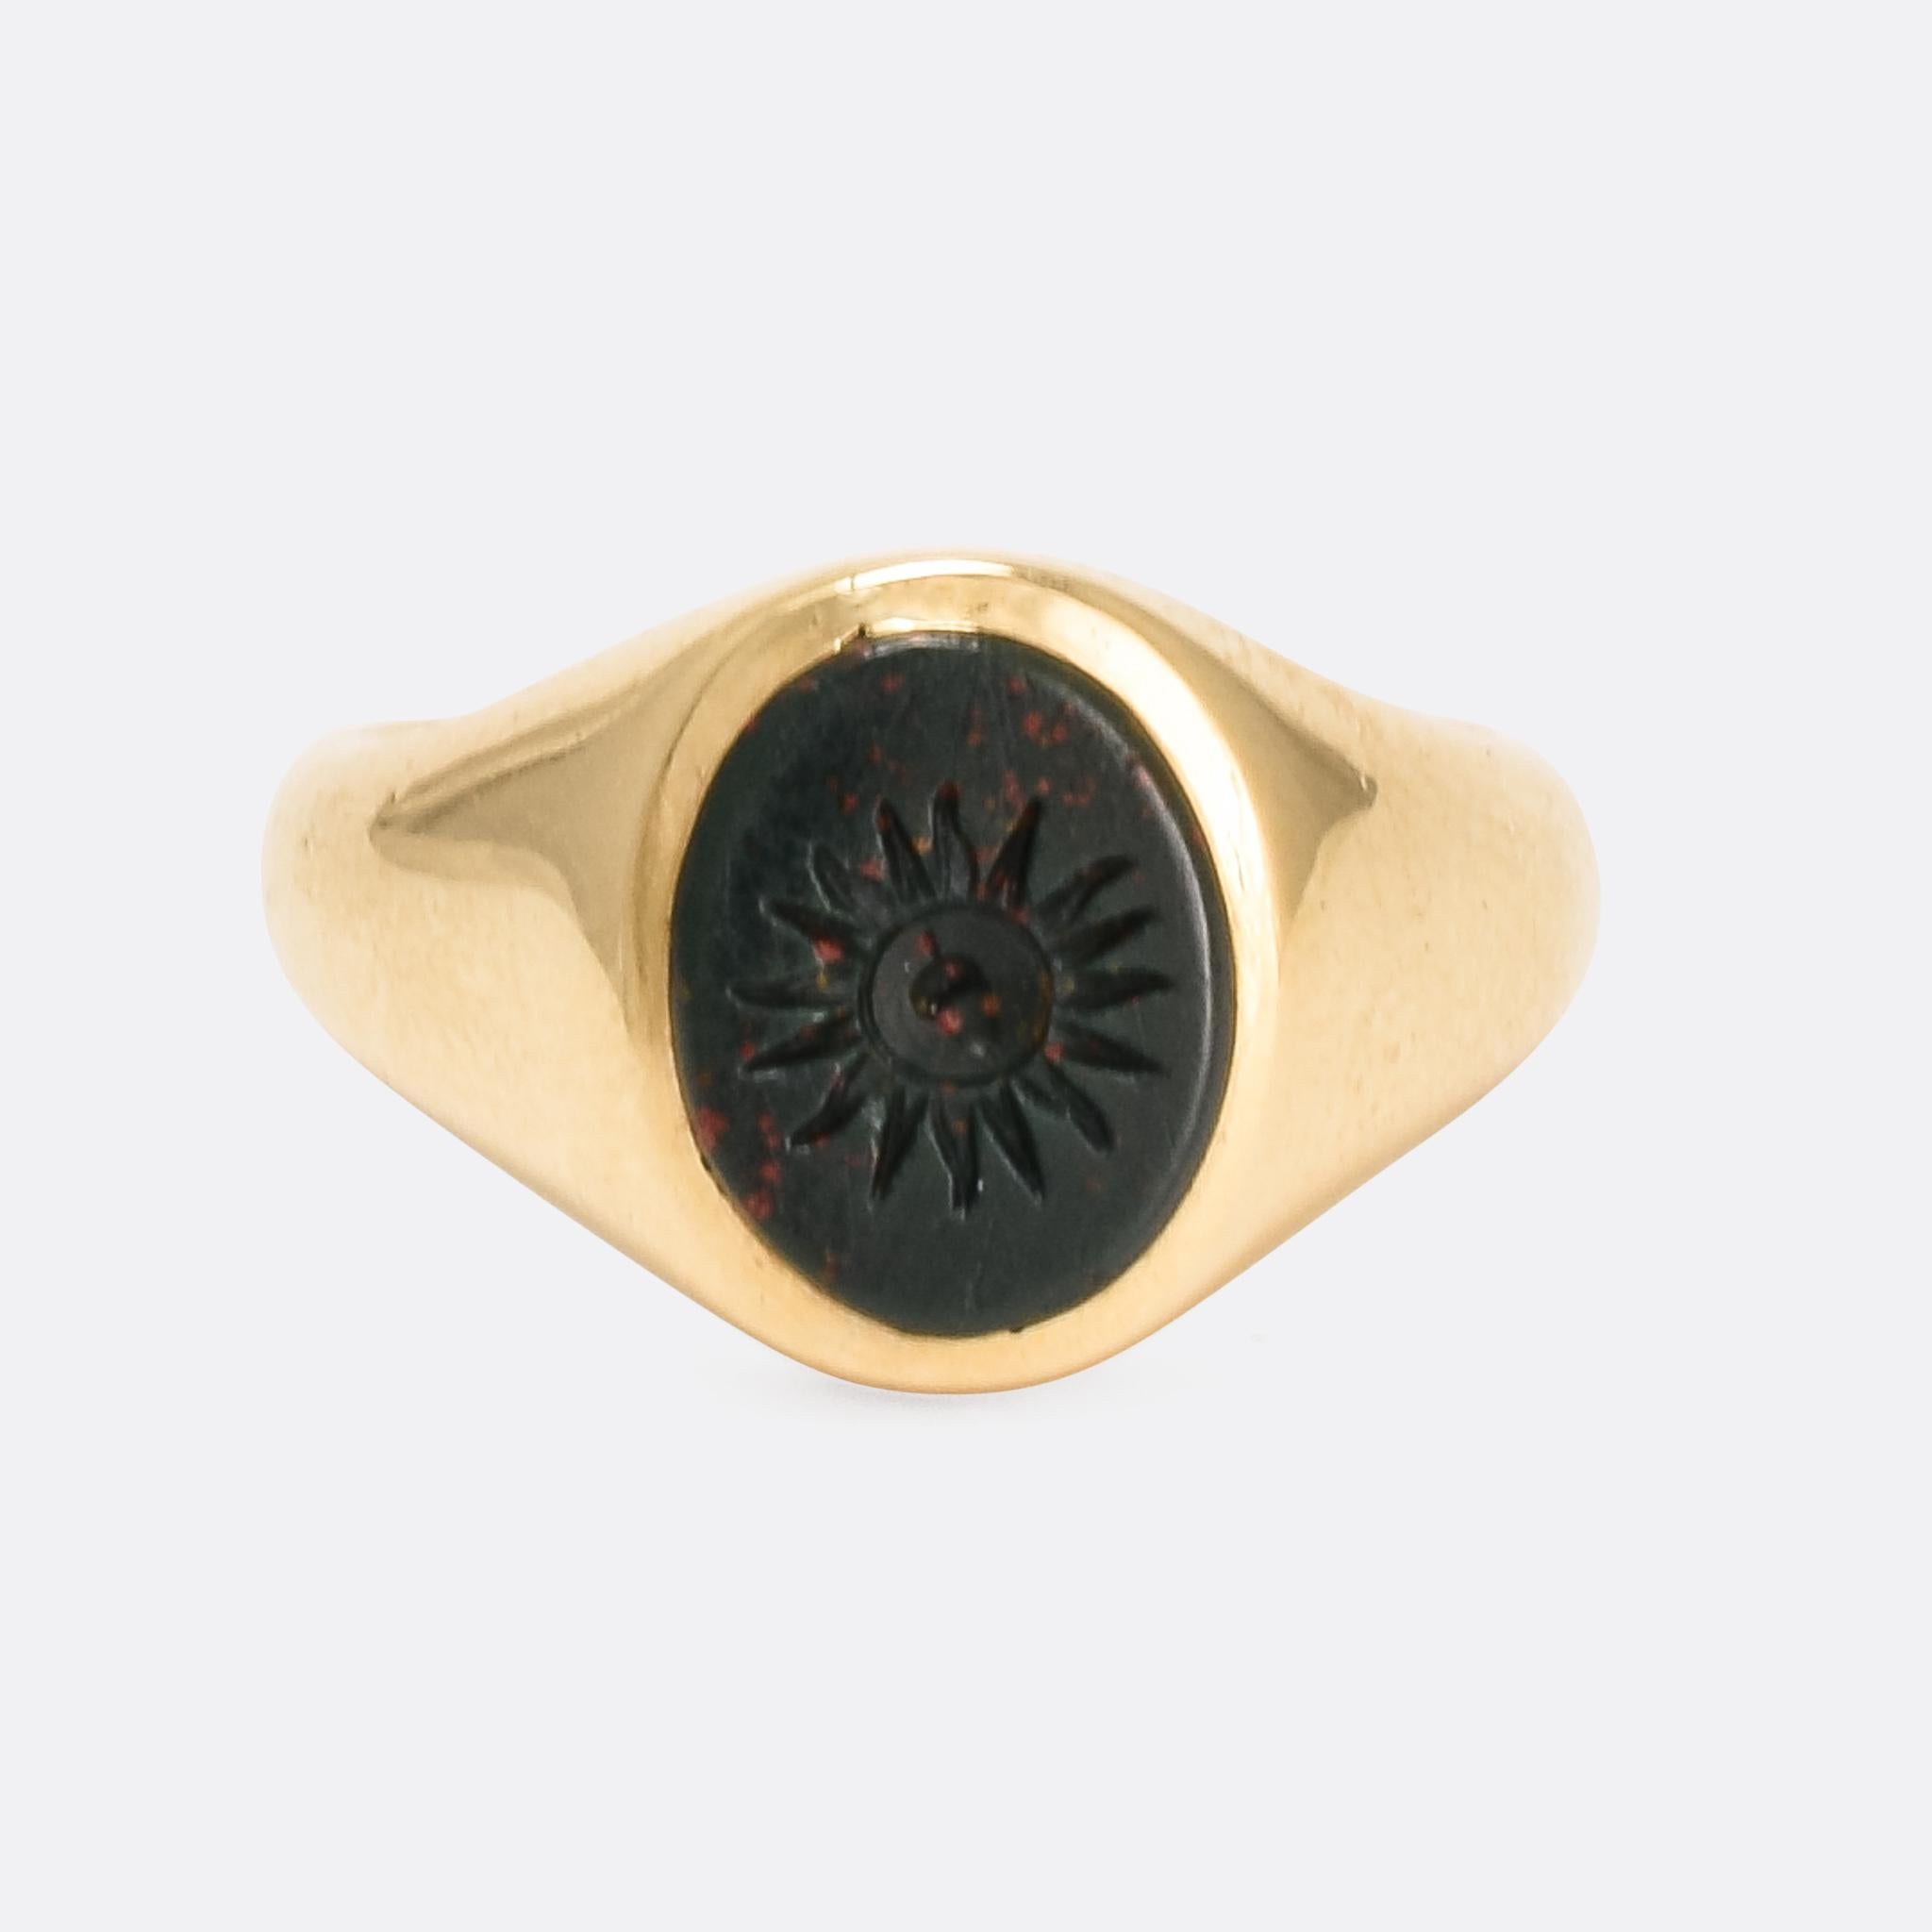 Cool vintage bloodstone signet ring, the oval face has been intaglio carved with an acorn within a sun. It's modelled in 9 karat yellow gold, with London hallmarks dating it to the year 1972.

STONES 
Bloodstone - 10.0 x 7.7mm

RING SIZE
4.75